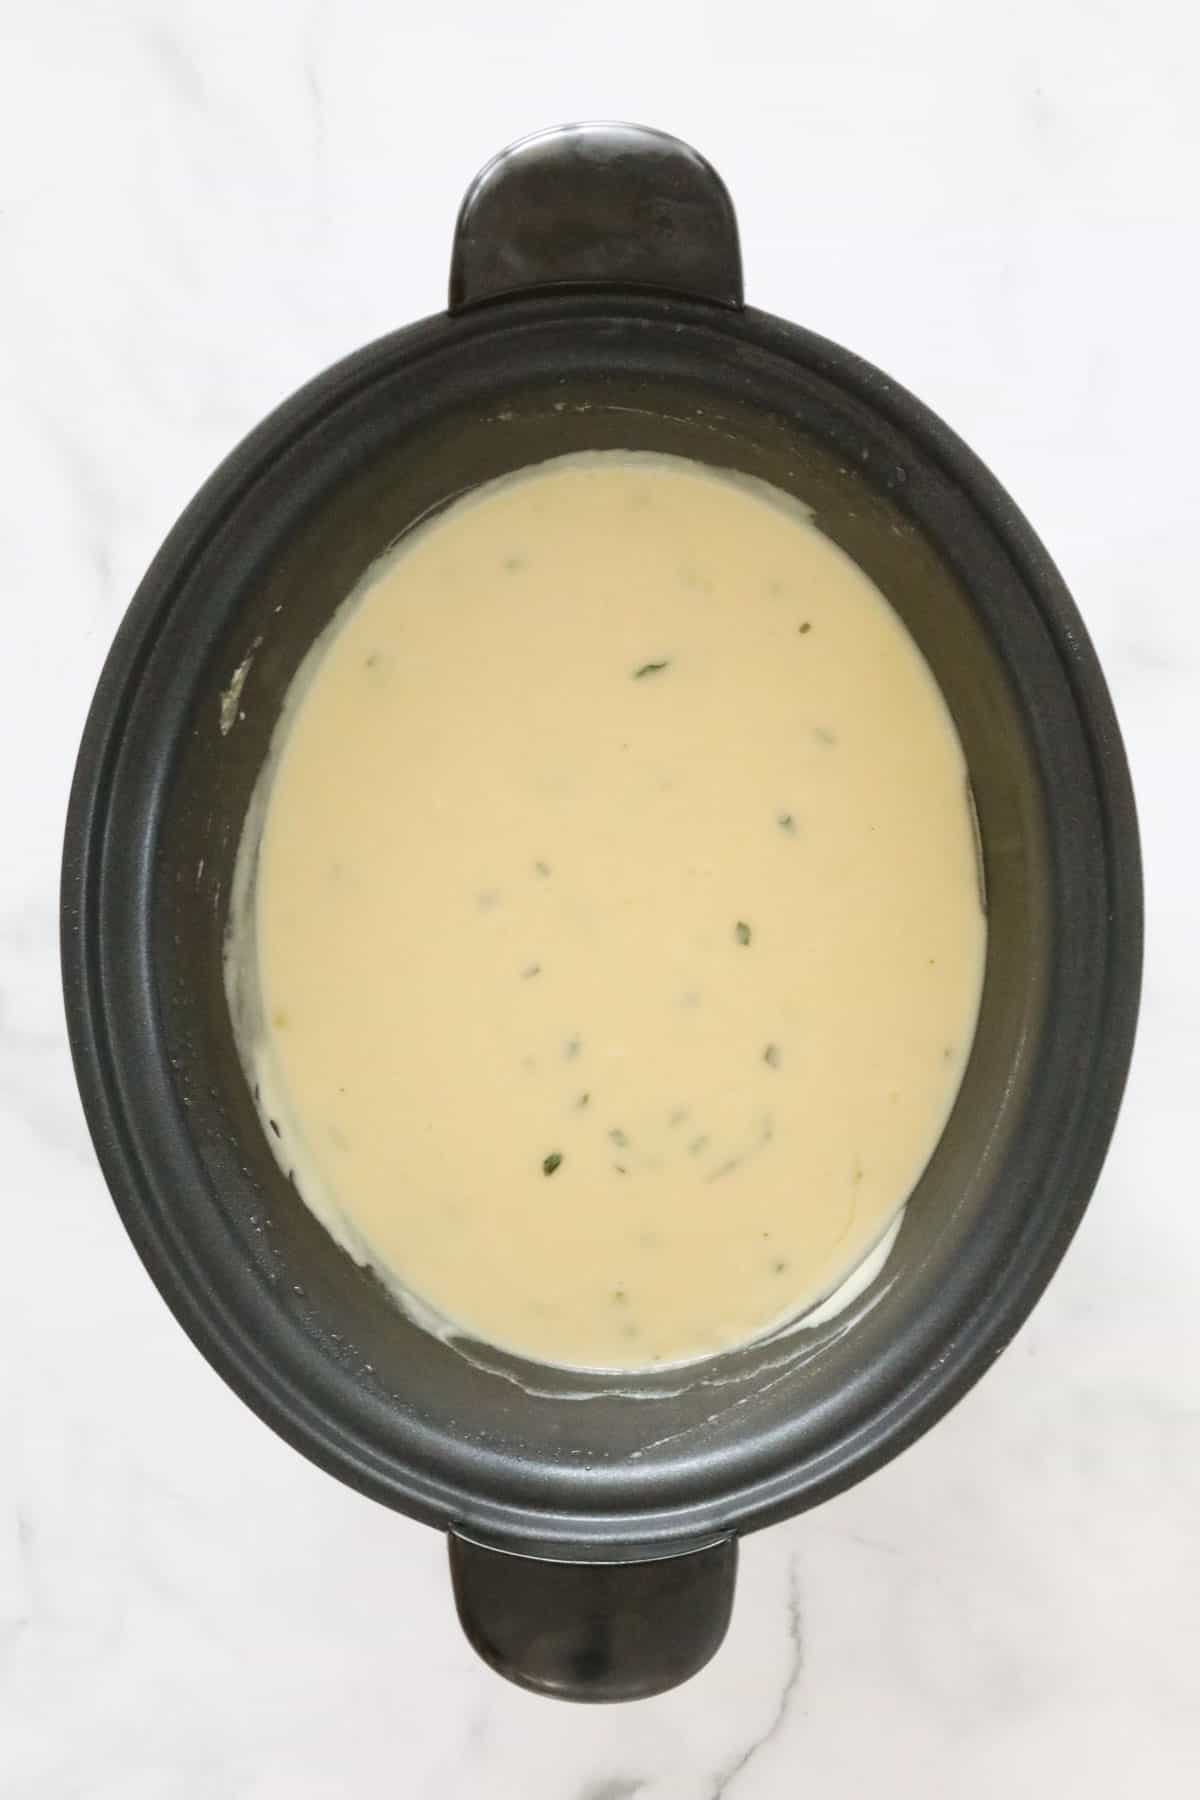 Creamy blended soup in a black slow cooker.